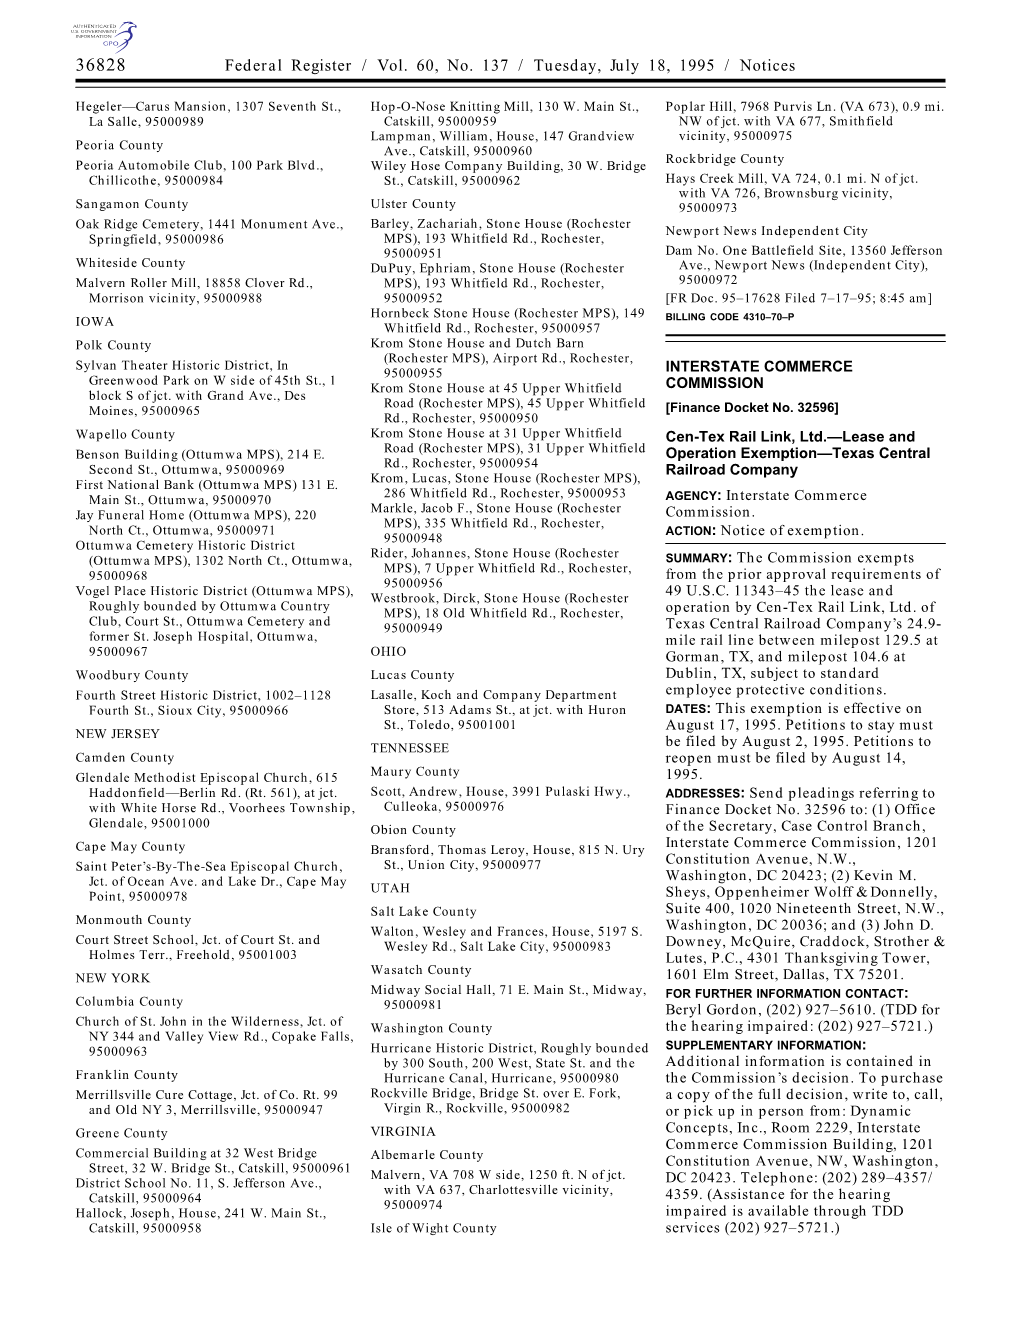 Federal Register / Vol. 60, No. 137 / Tuesday, July 18, 1995 / Notices